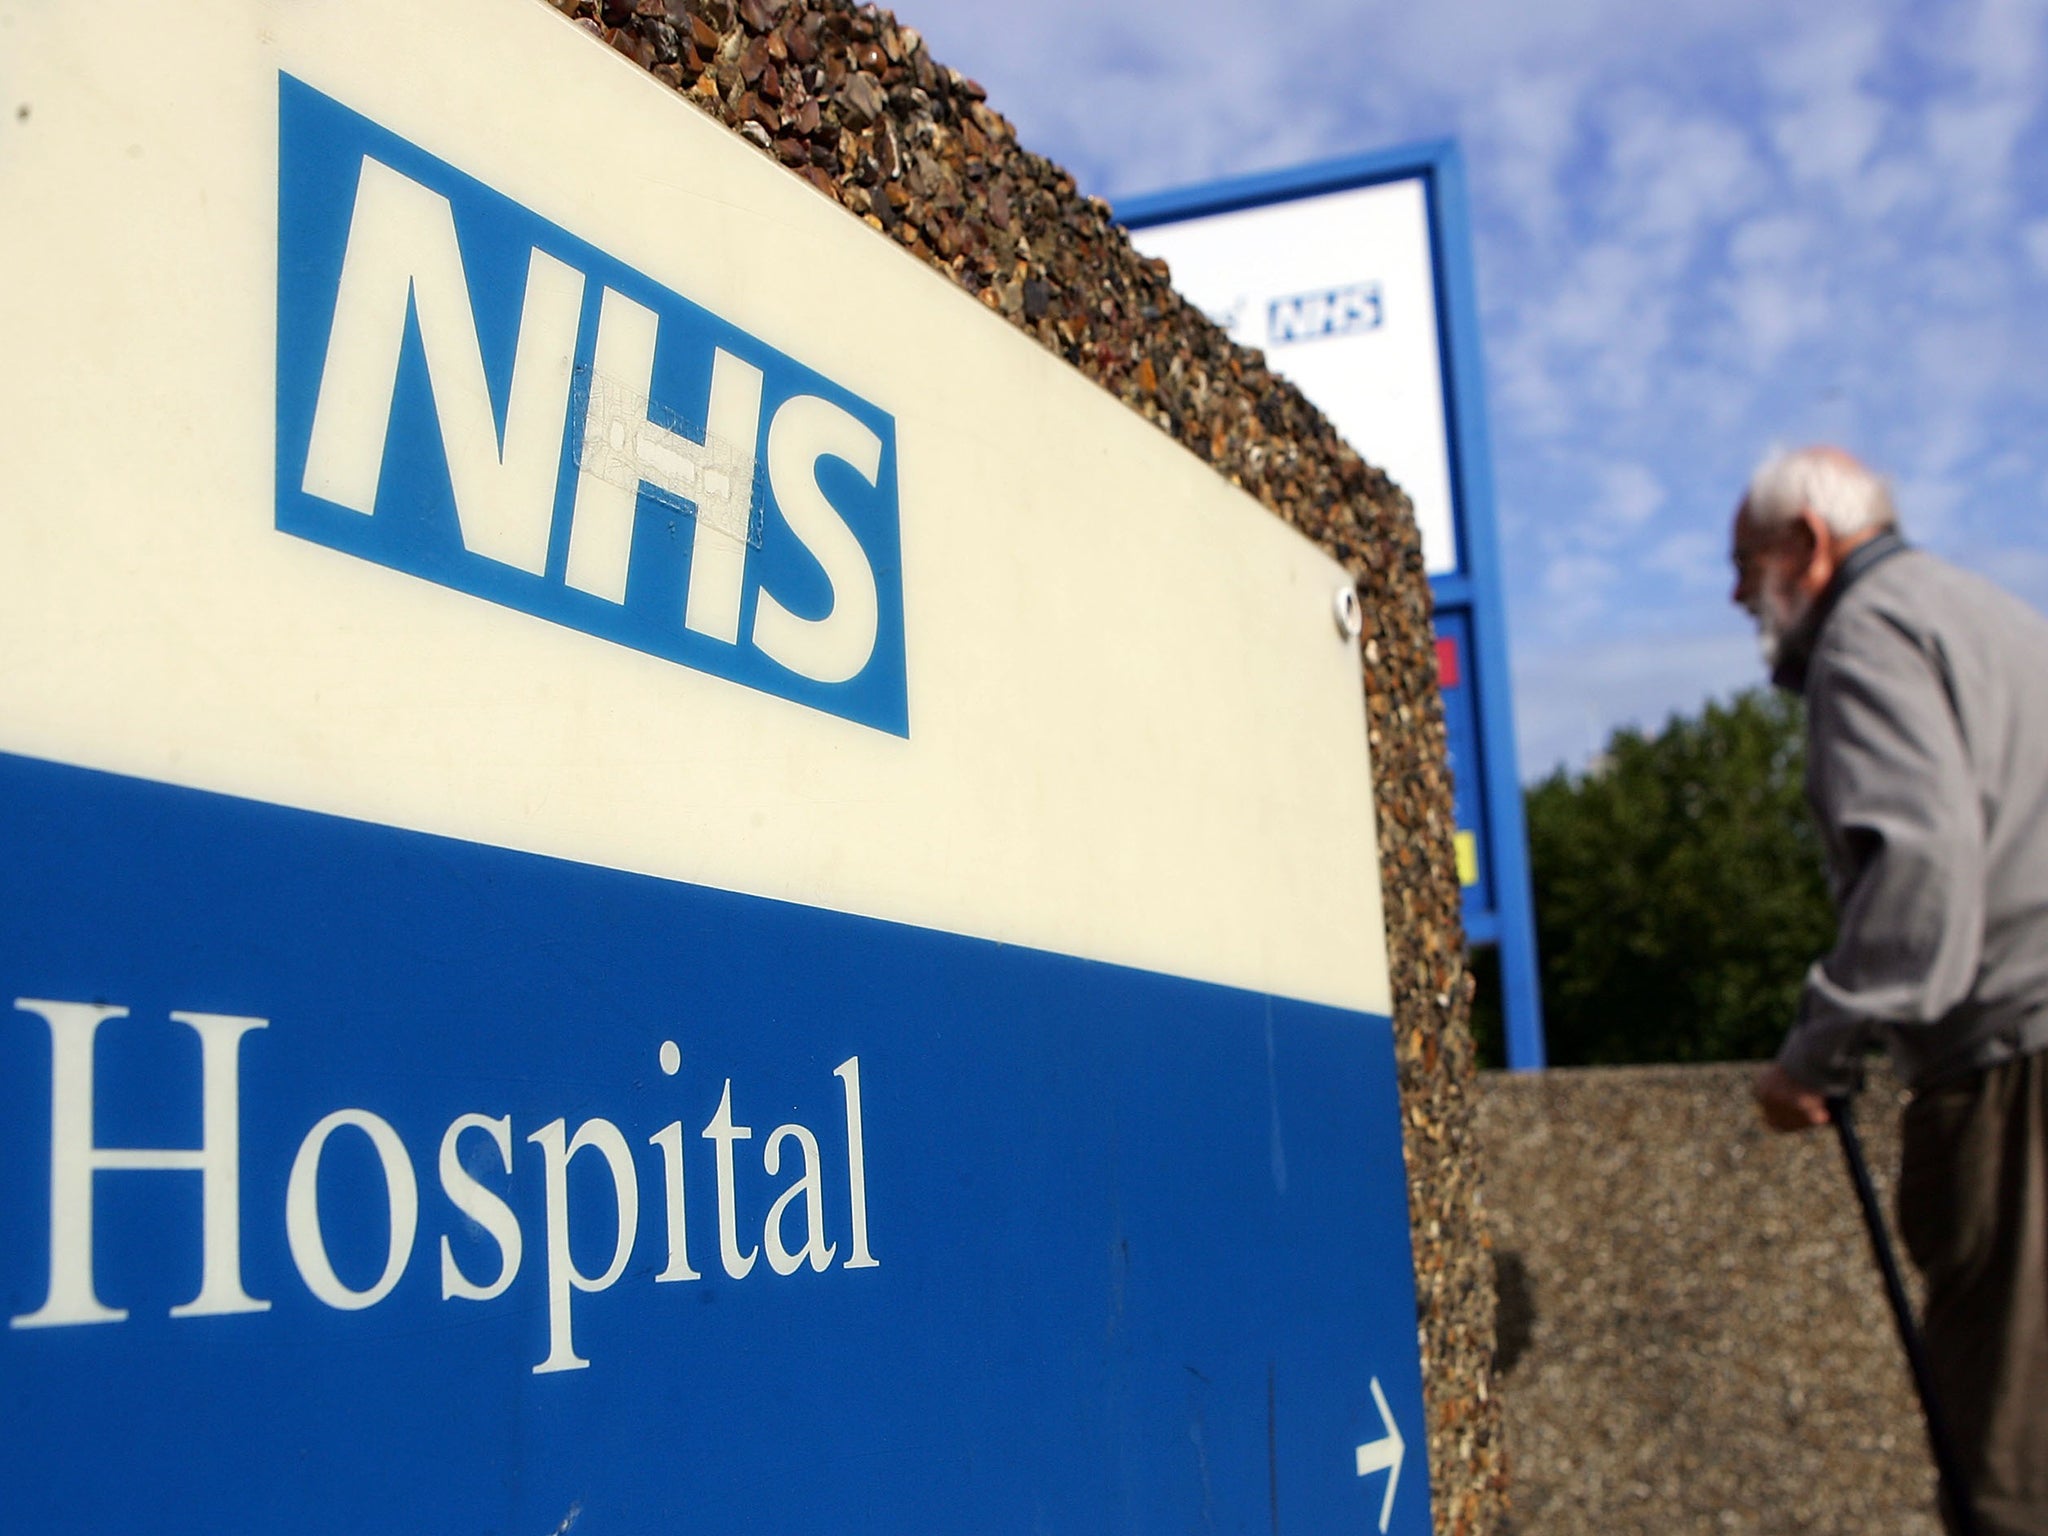 On current trends, the NHS in England will run out money this year or next